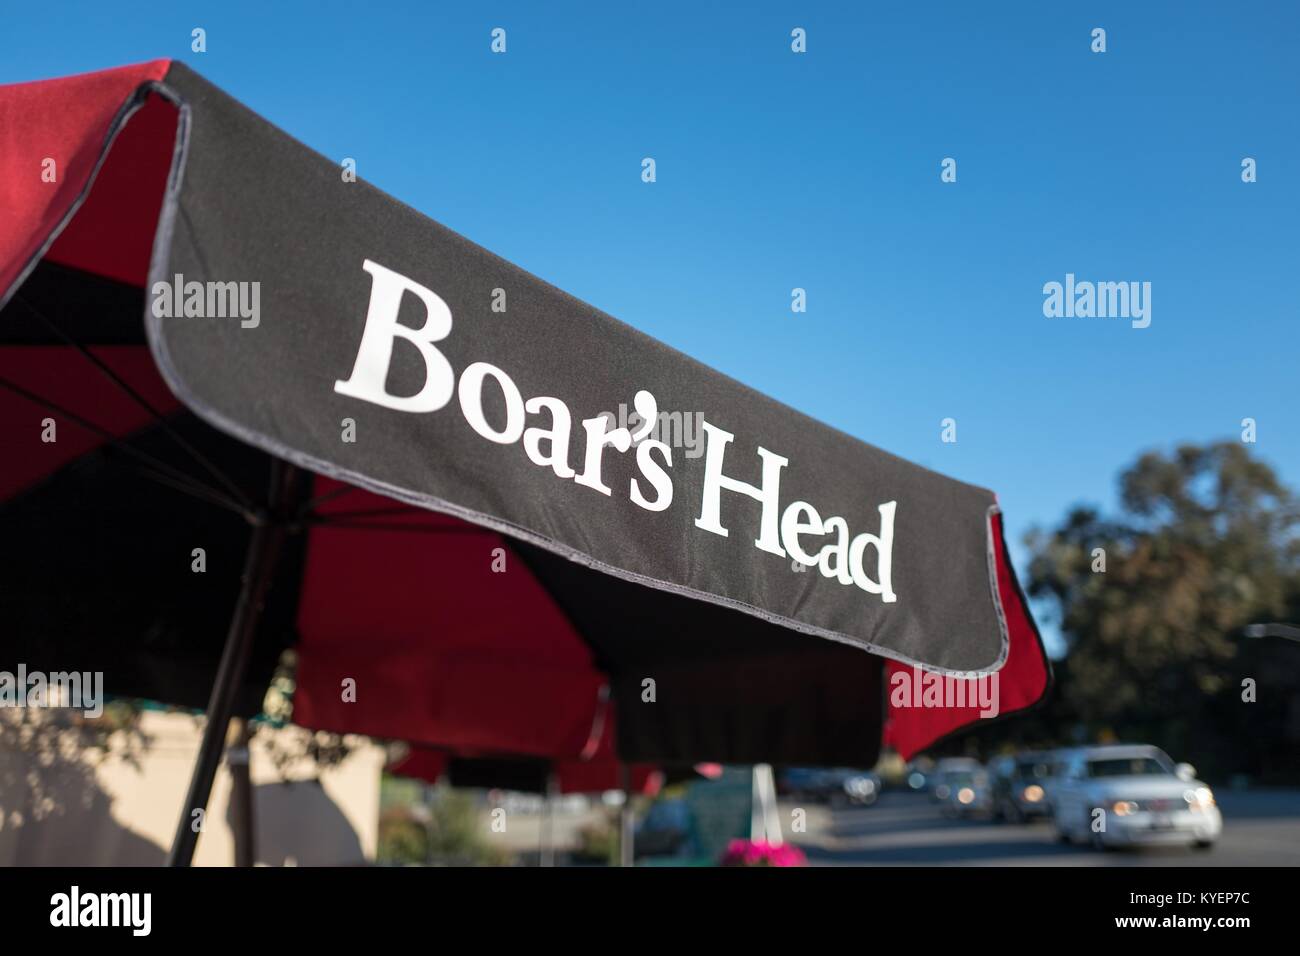 Close-up of red and black umbrella with logo for gourmet meat company Boar's Head, in Silicon Valley, Menlo Park, California, November 14, 2017. () Stock Photo